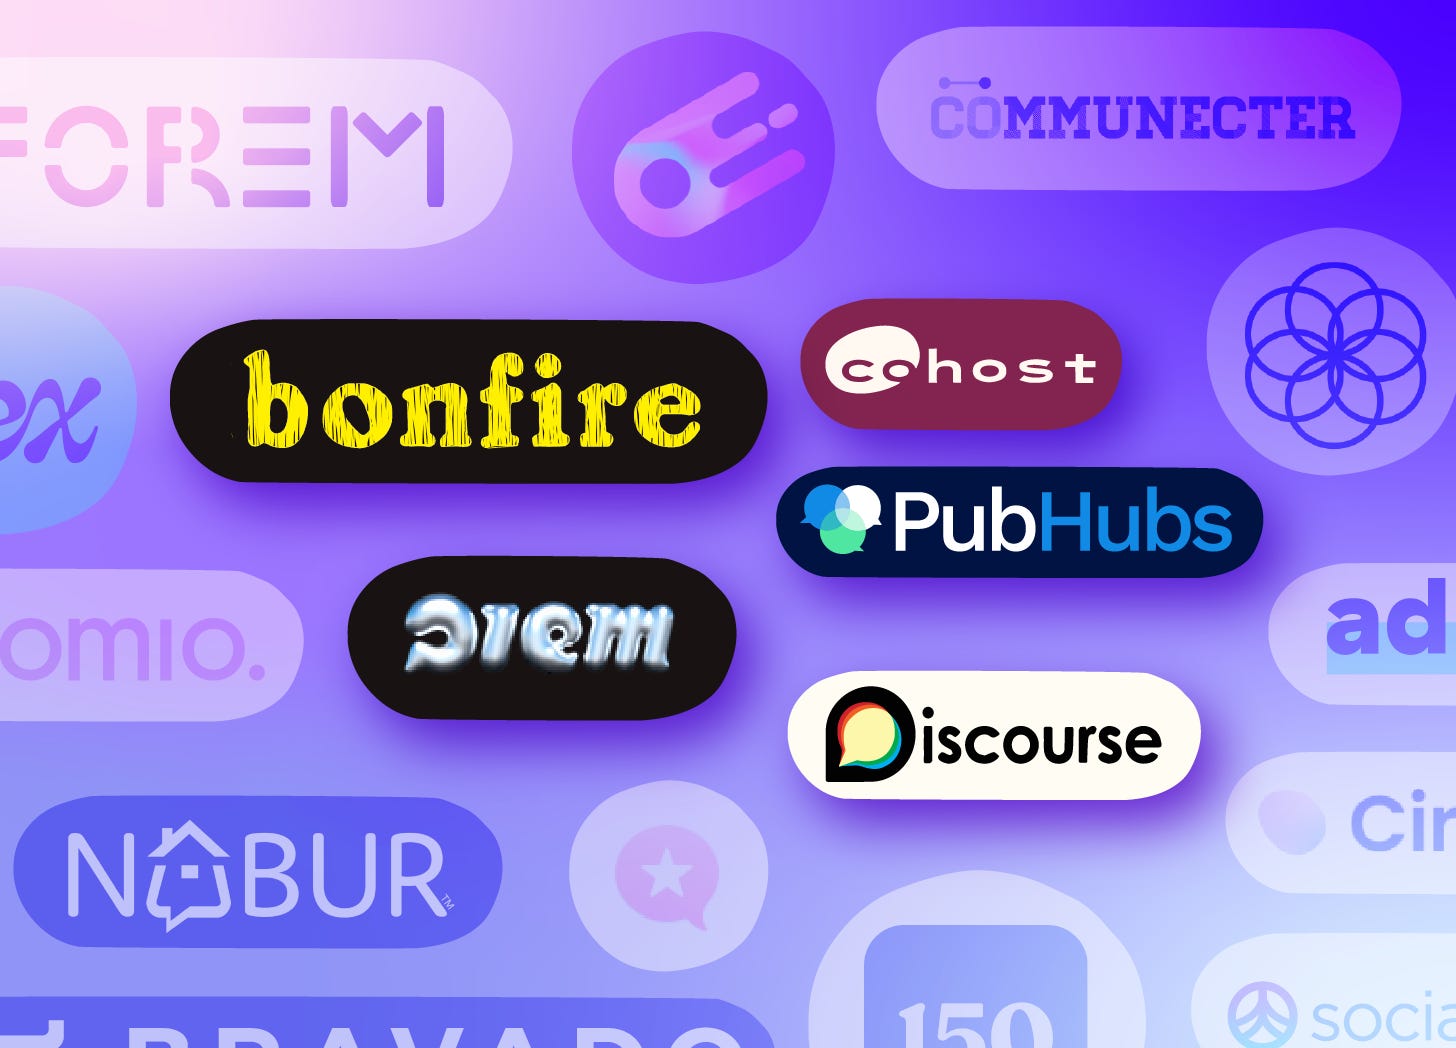 Many logos for various digital spaces. Five are in focus and full opacity in the center: Bonfire, Cohost, Diem, PubHubs, Discourse. The rest are slightly faded on a blue-ish gradient background.